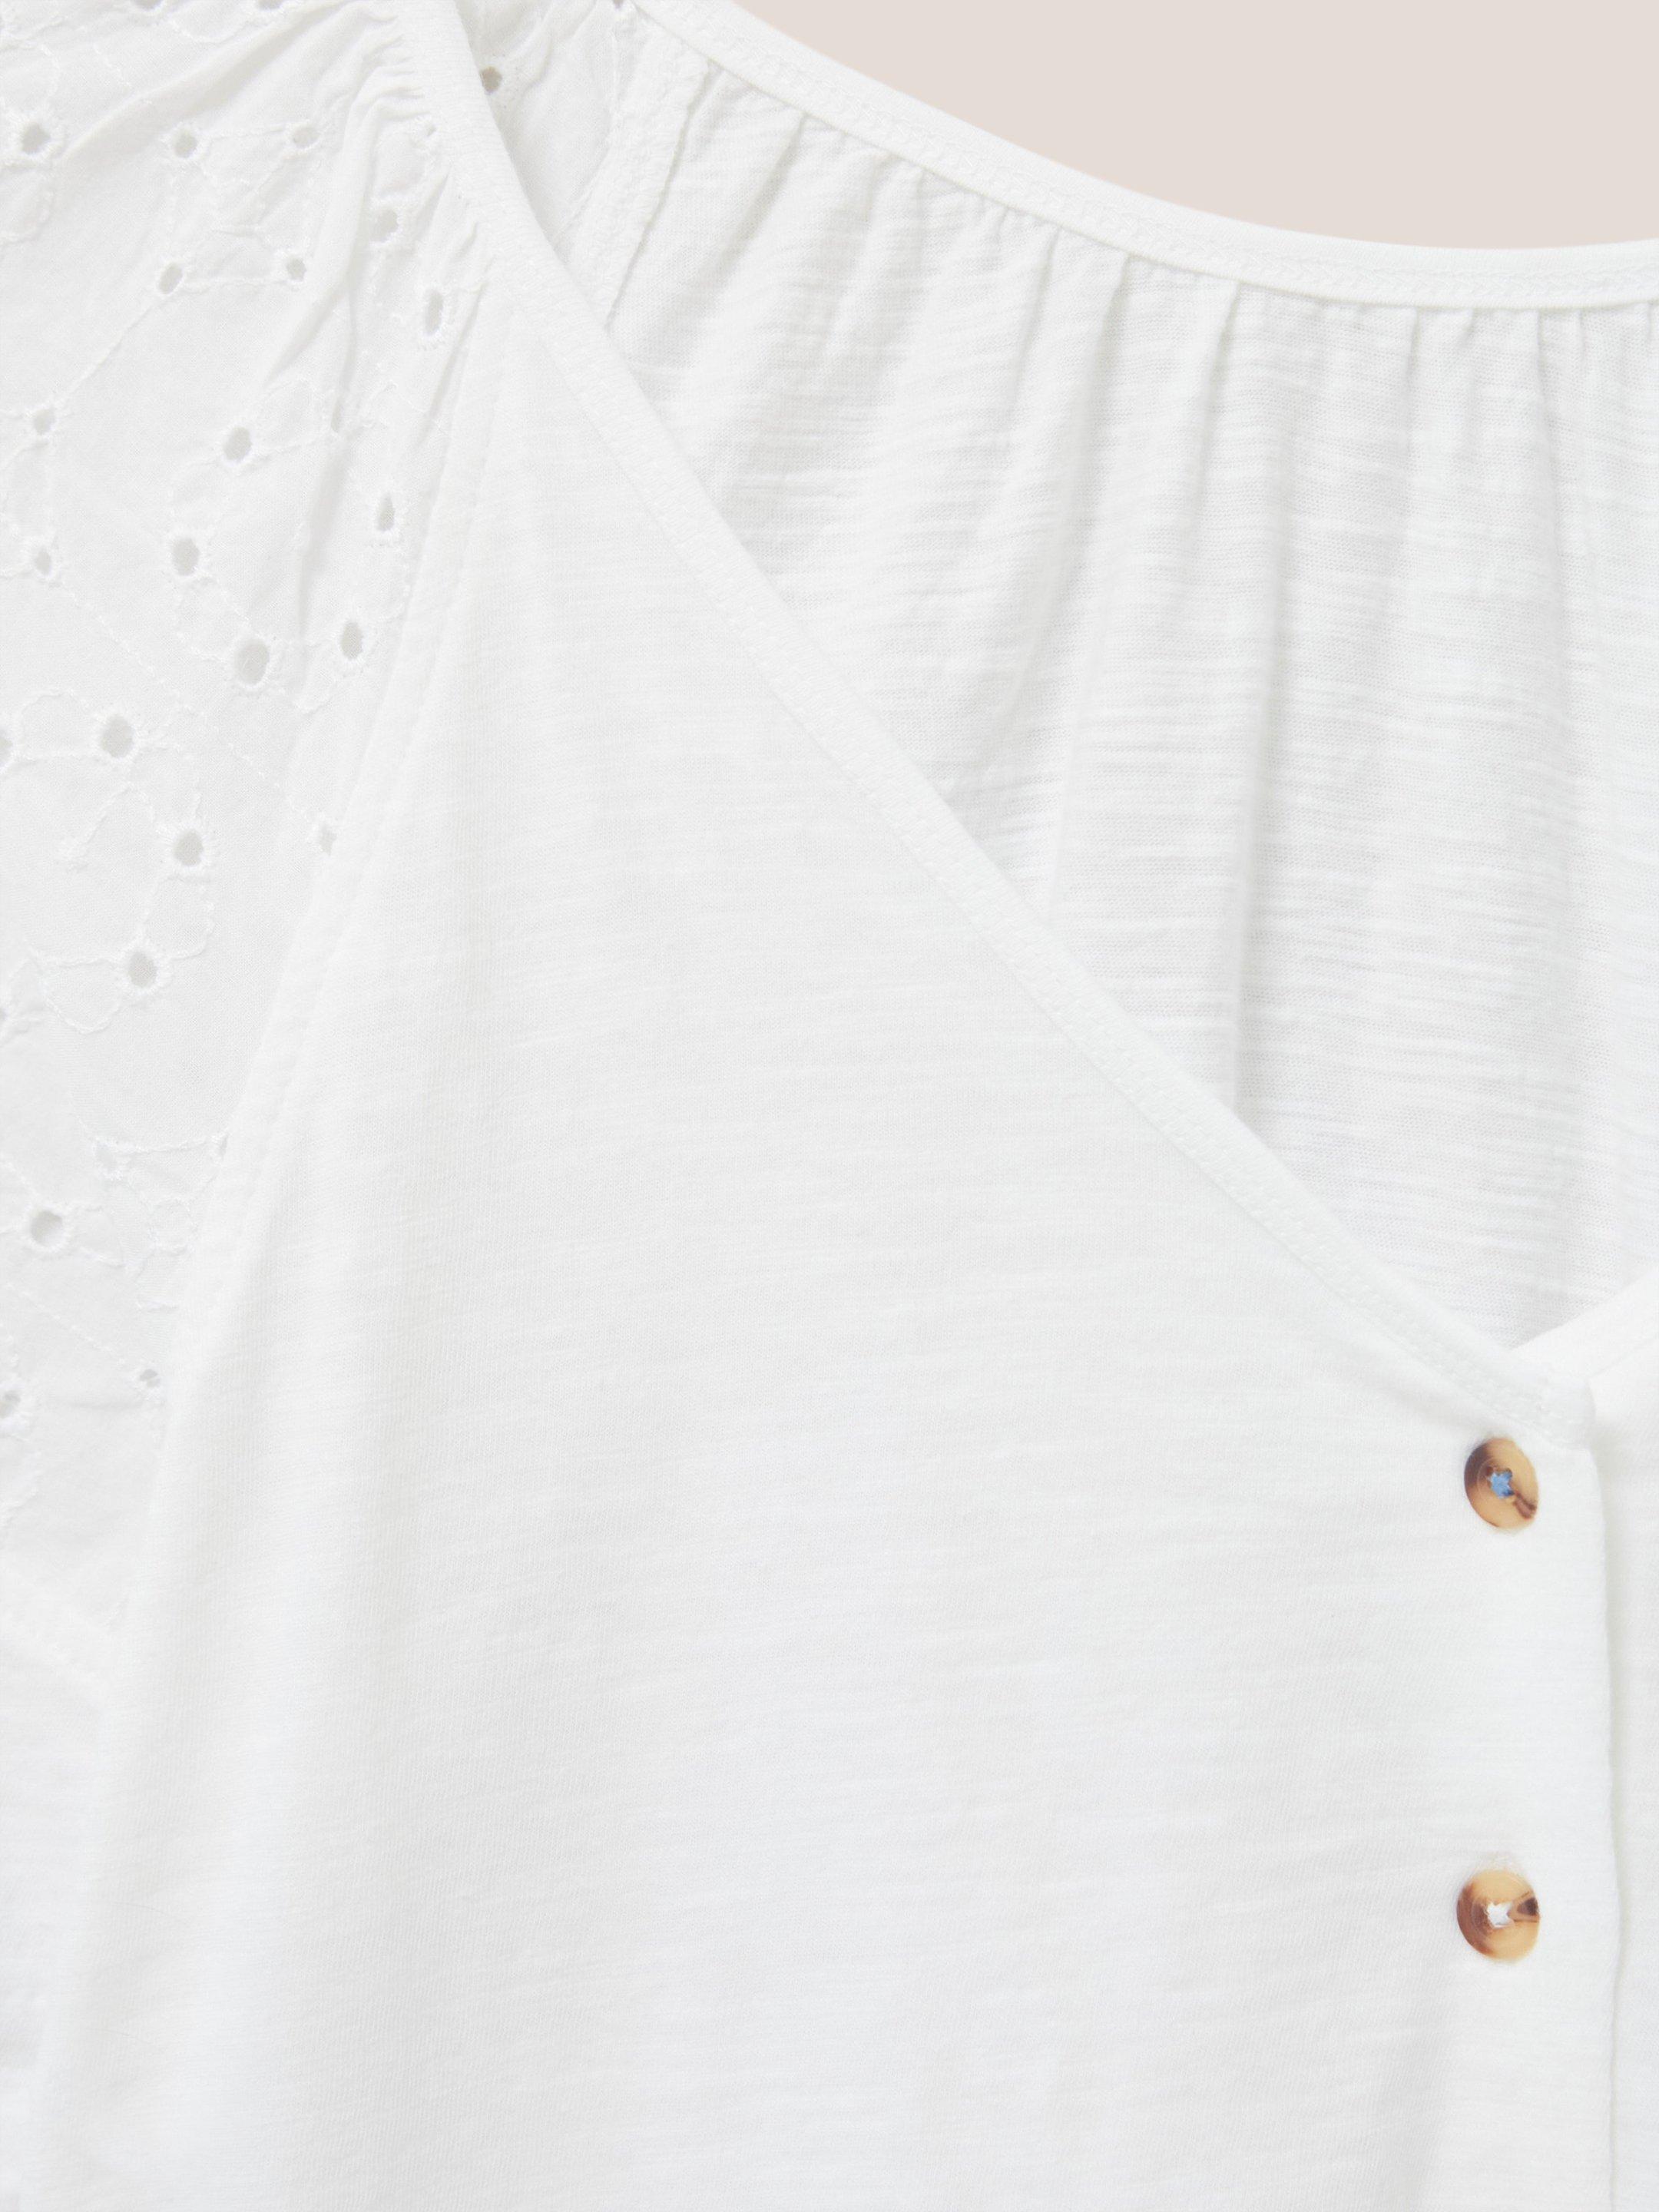 BRODERIE MIX TWO WAY TOP in BRIL WHITE - FLAT DETAIL